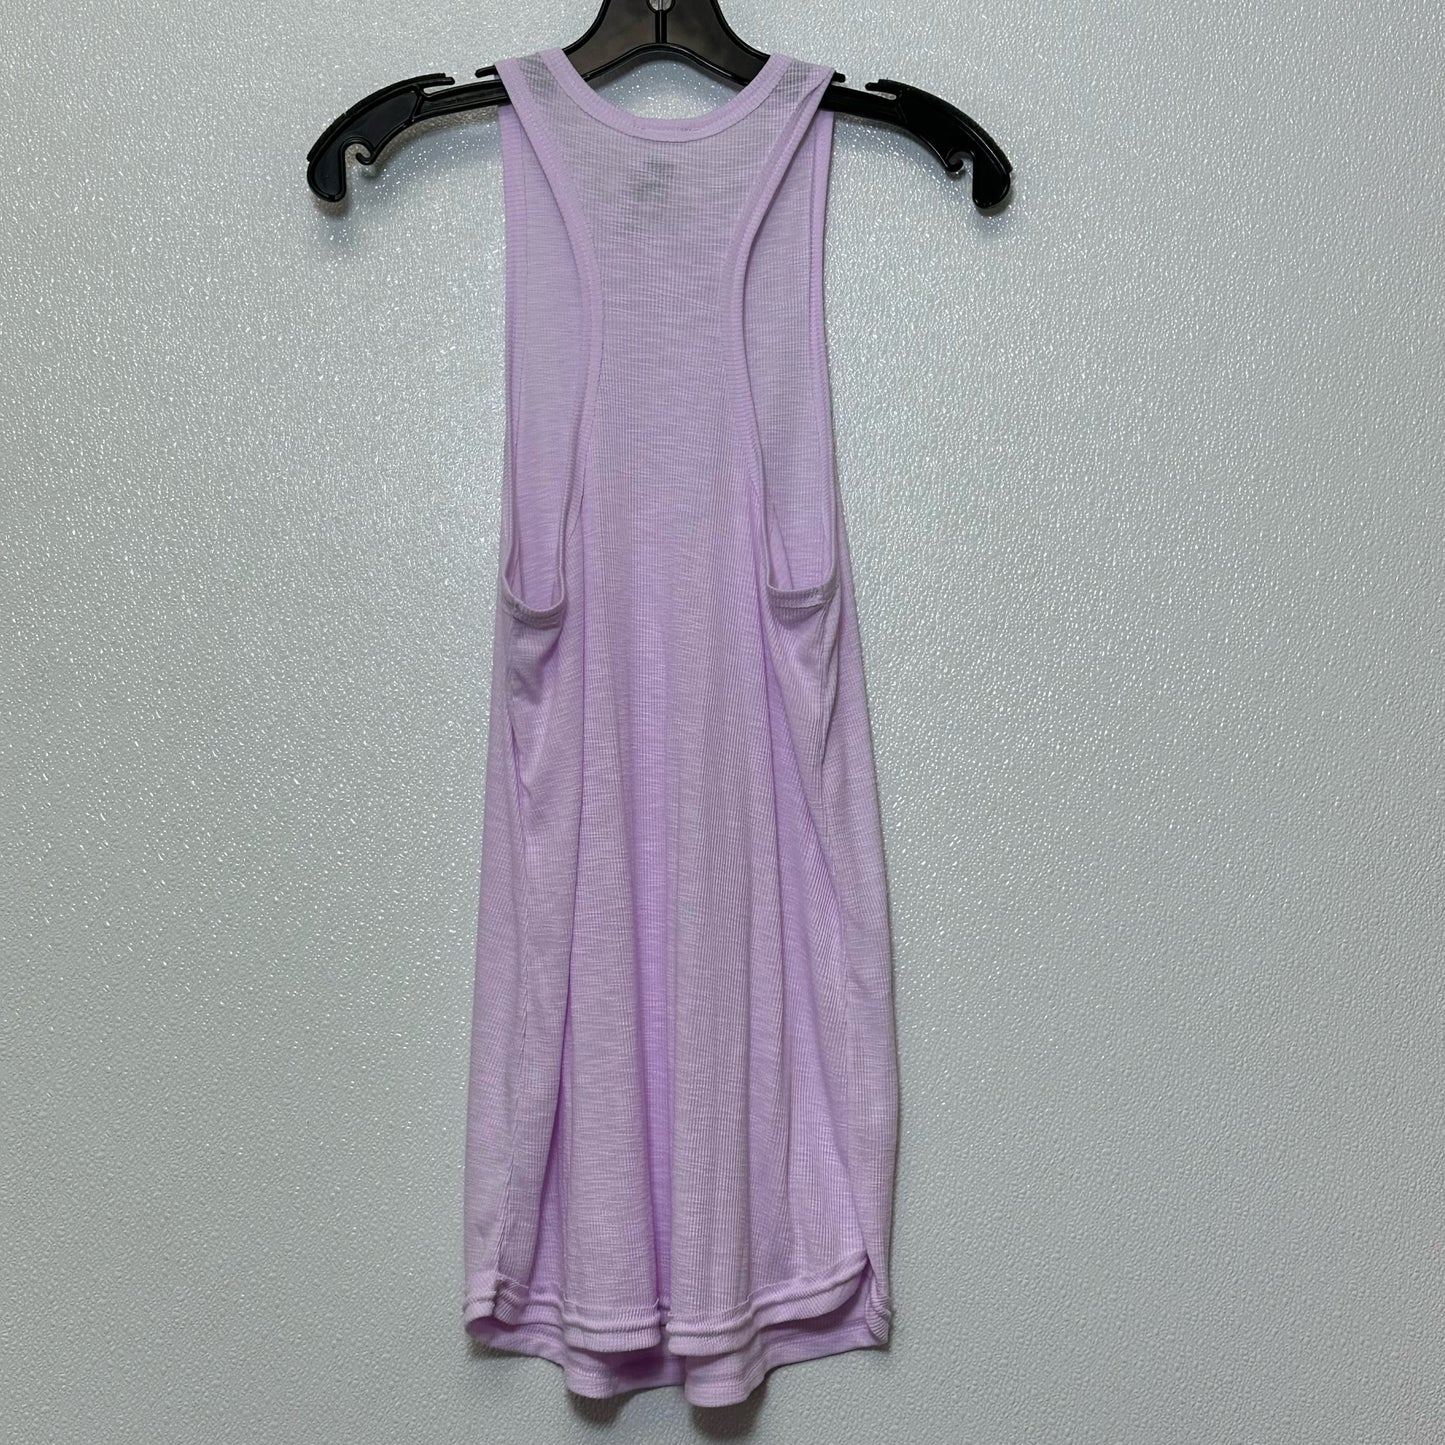 Top Sleeveless Basic By Free People  Size: S